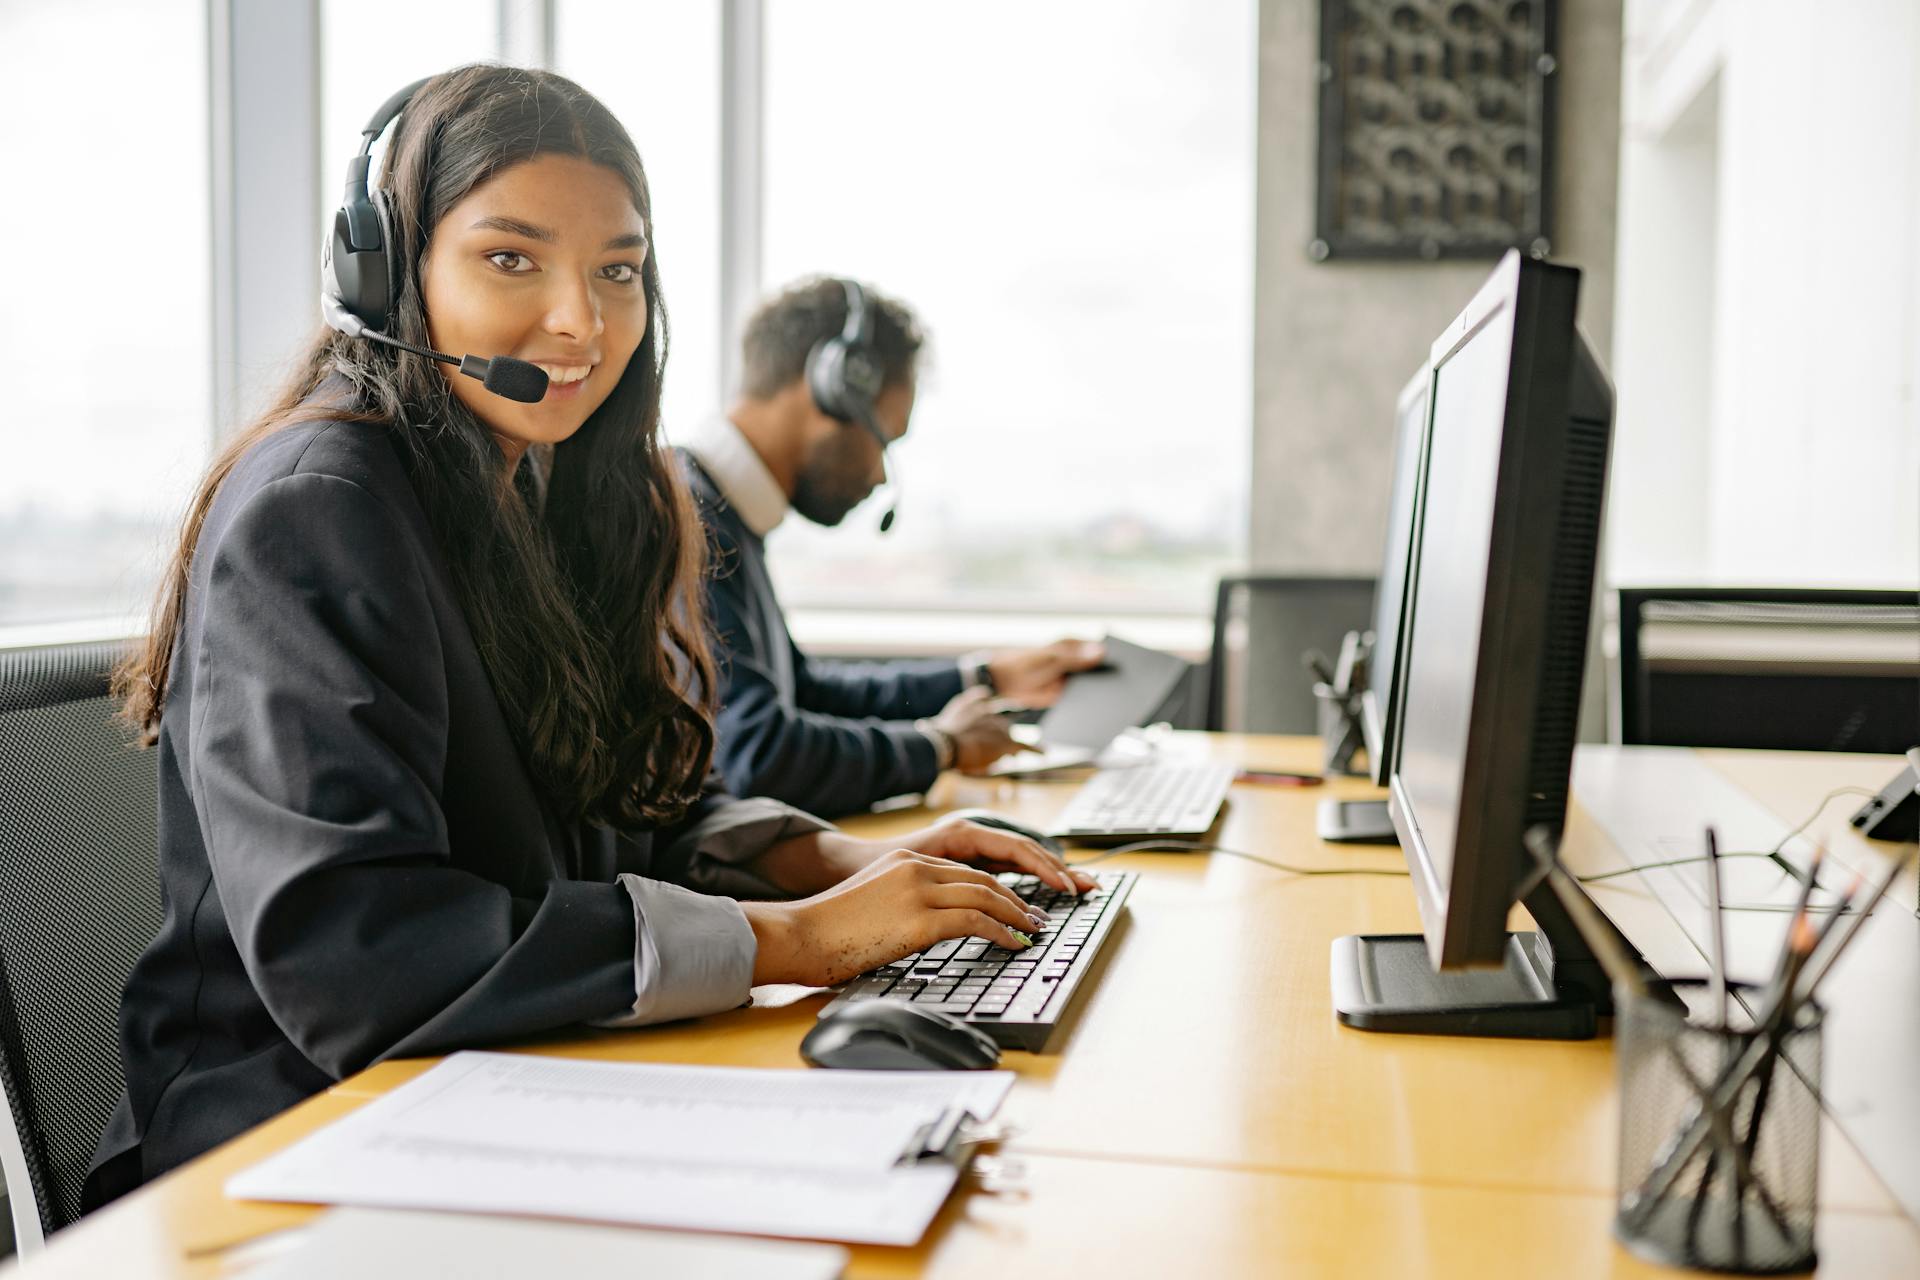 Free A Smiling Woman Working in a Call Center while Looking at Camera Stock Photo